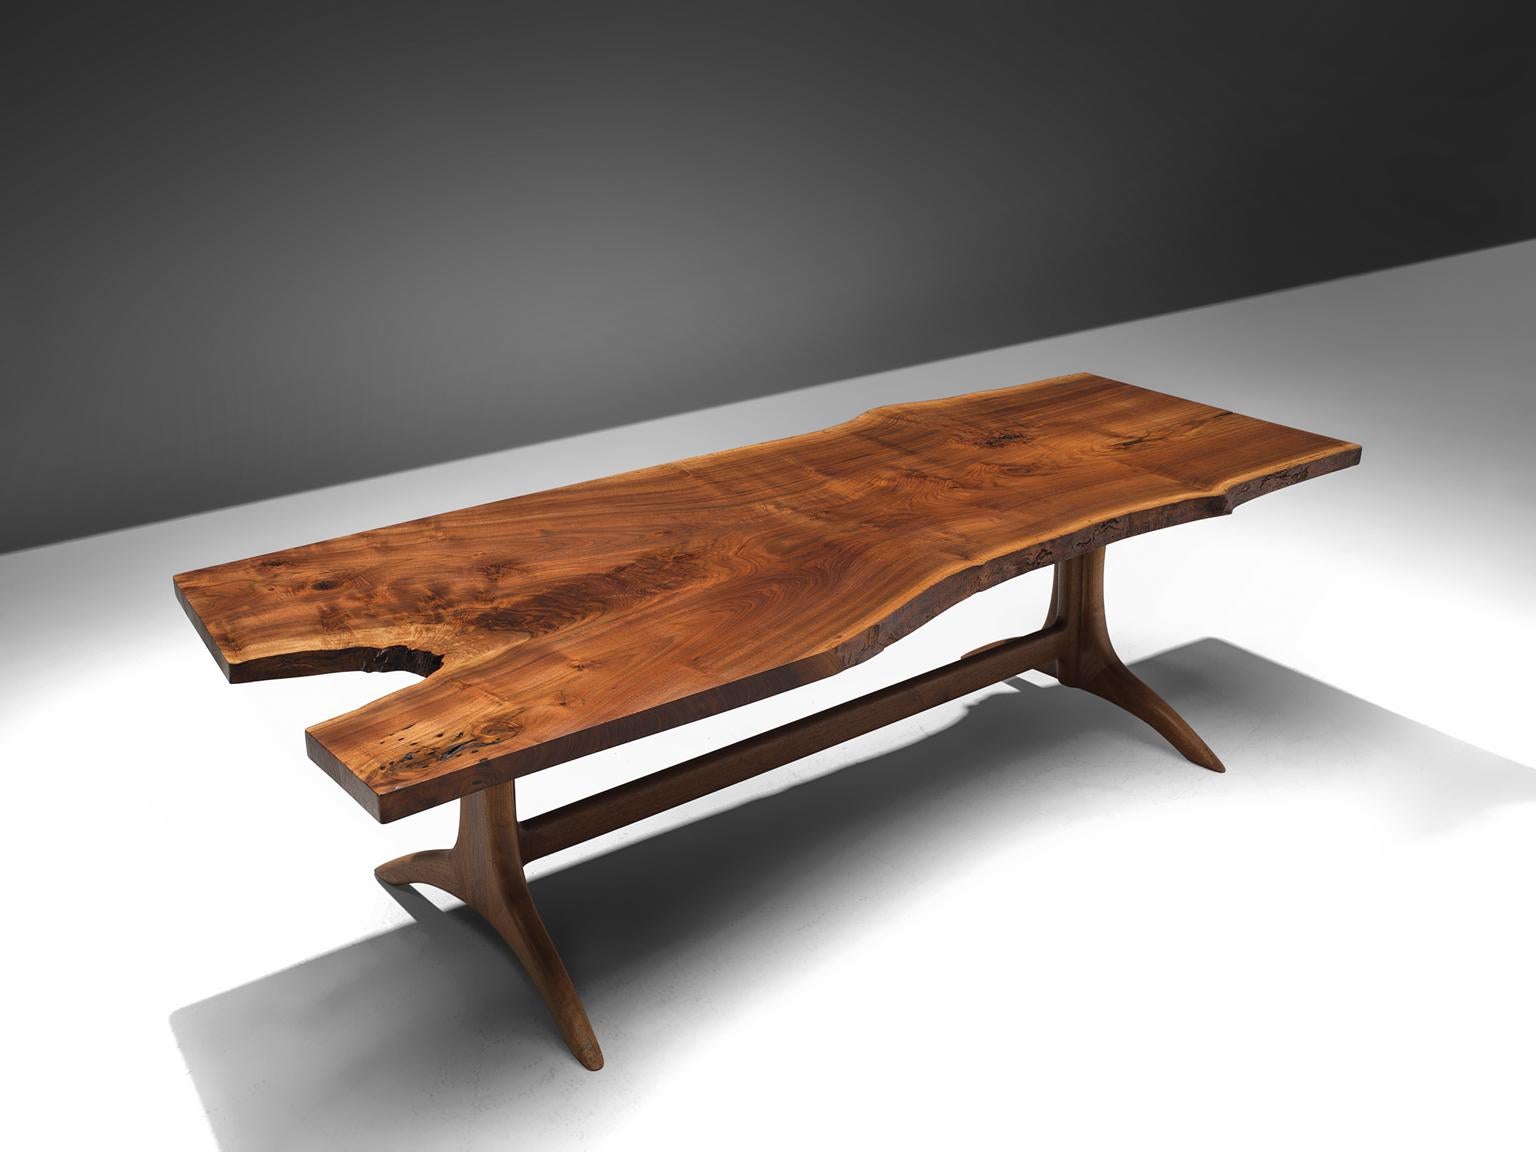 This sculptural piece by Maloof is hand and custom made and unique. The wood, Californian black walnut, is handpicked by Maloof himself. The piece is, just as other piece by Maloof a sculptural, timeless, high-quality wooden piece. This table he